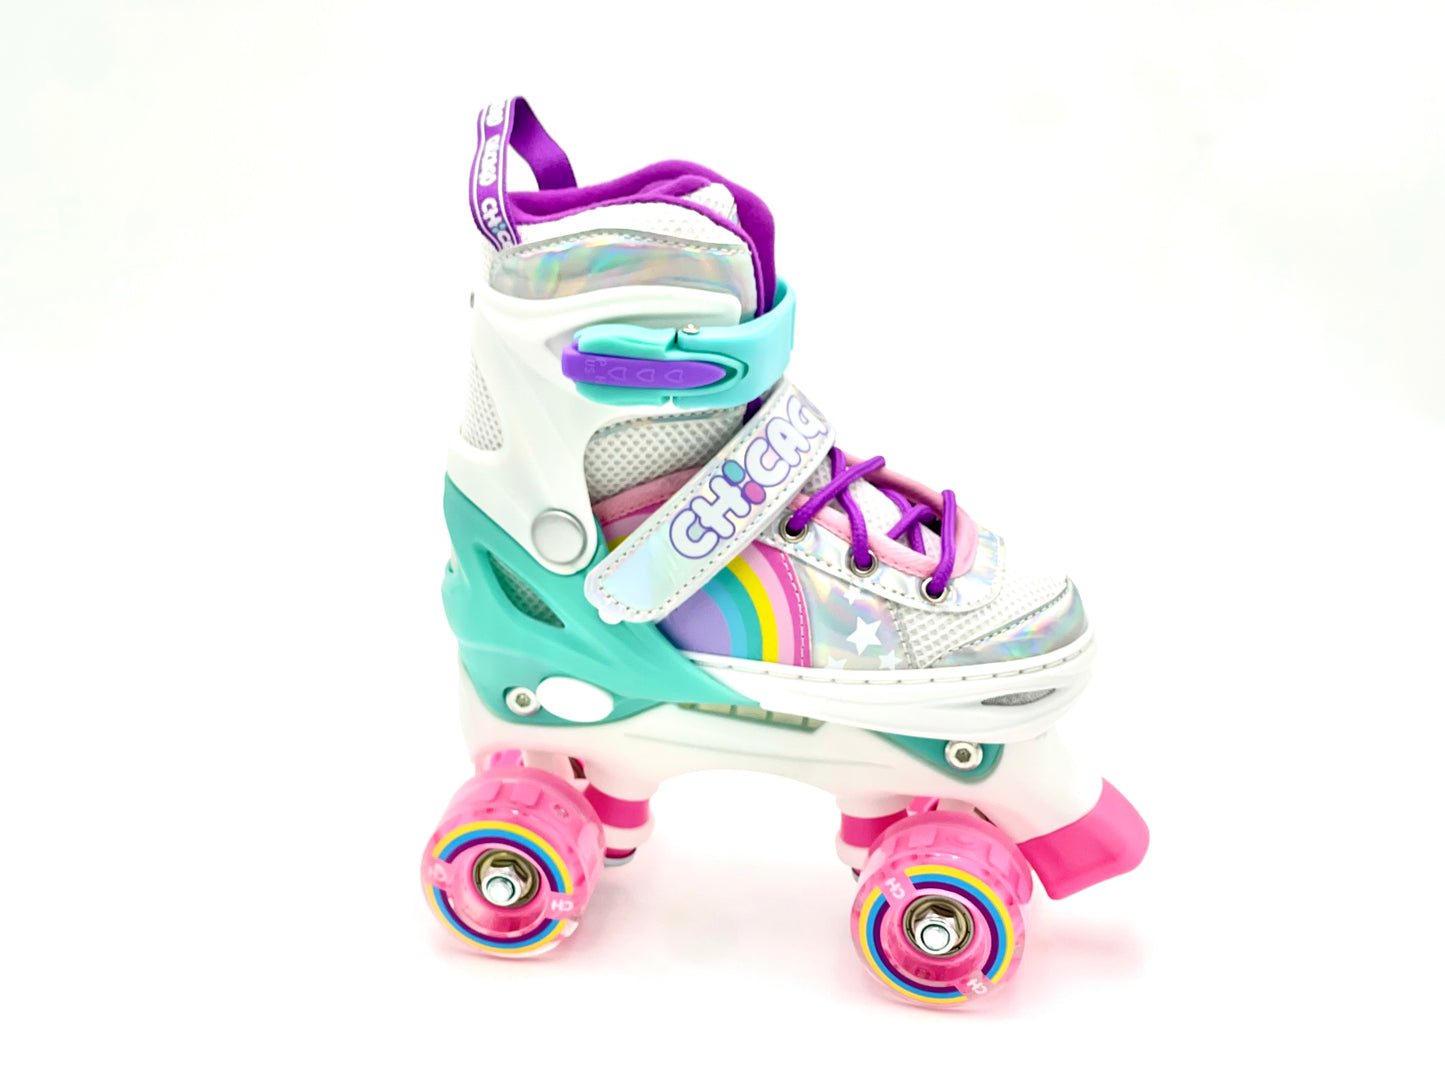 Kit of Adjustable Quad Skates with Chicago Roller protections